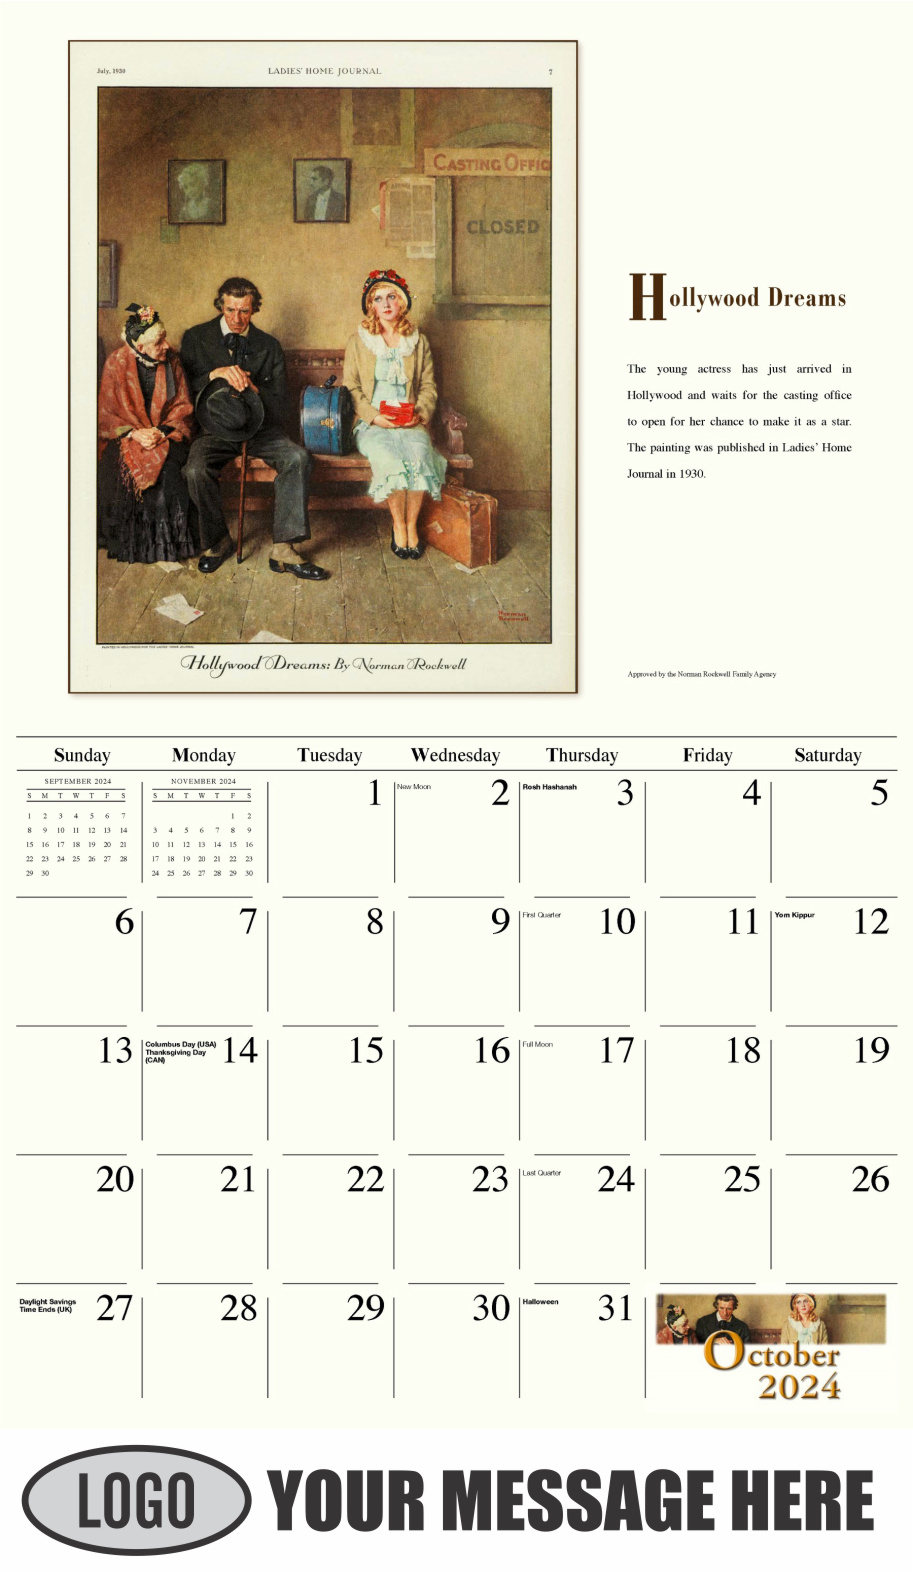 Memorable Images by Norman Rockwell 2024 Business Promotional Wall Calendar - October